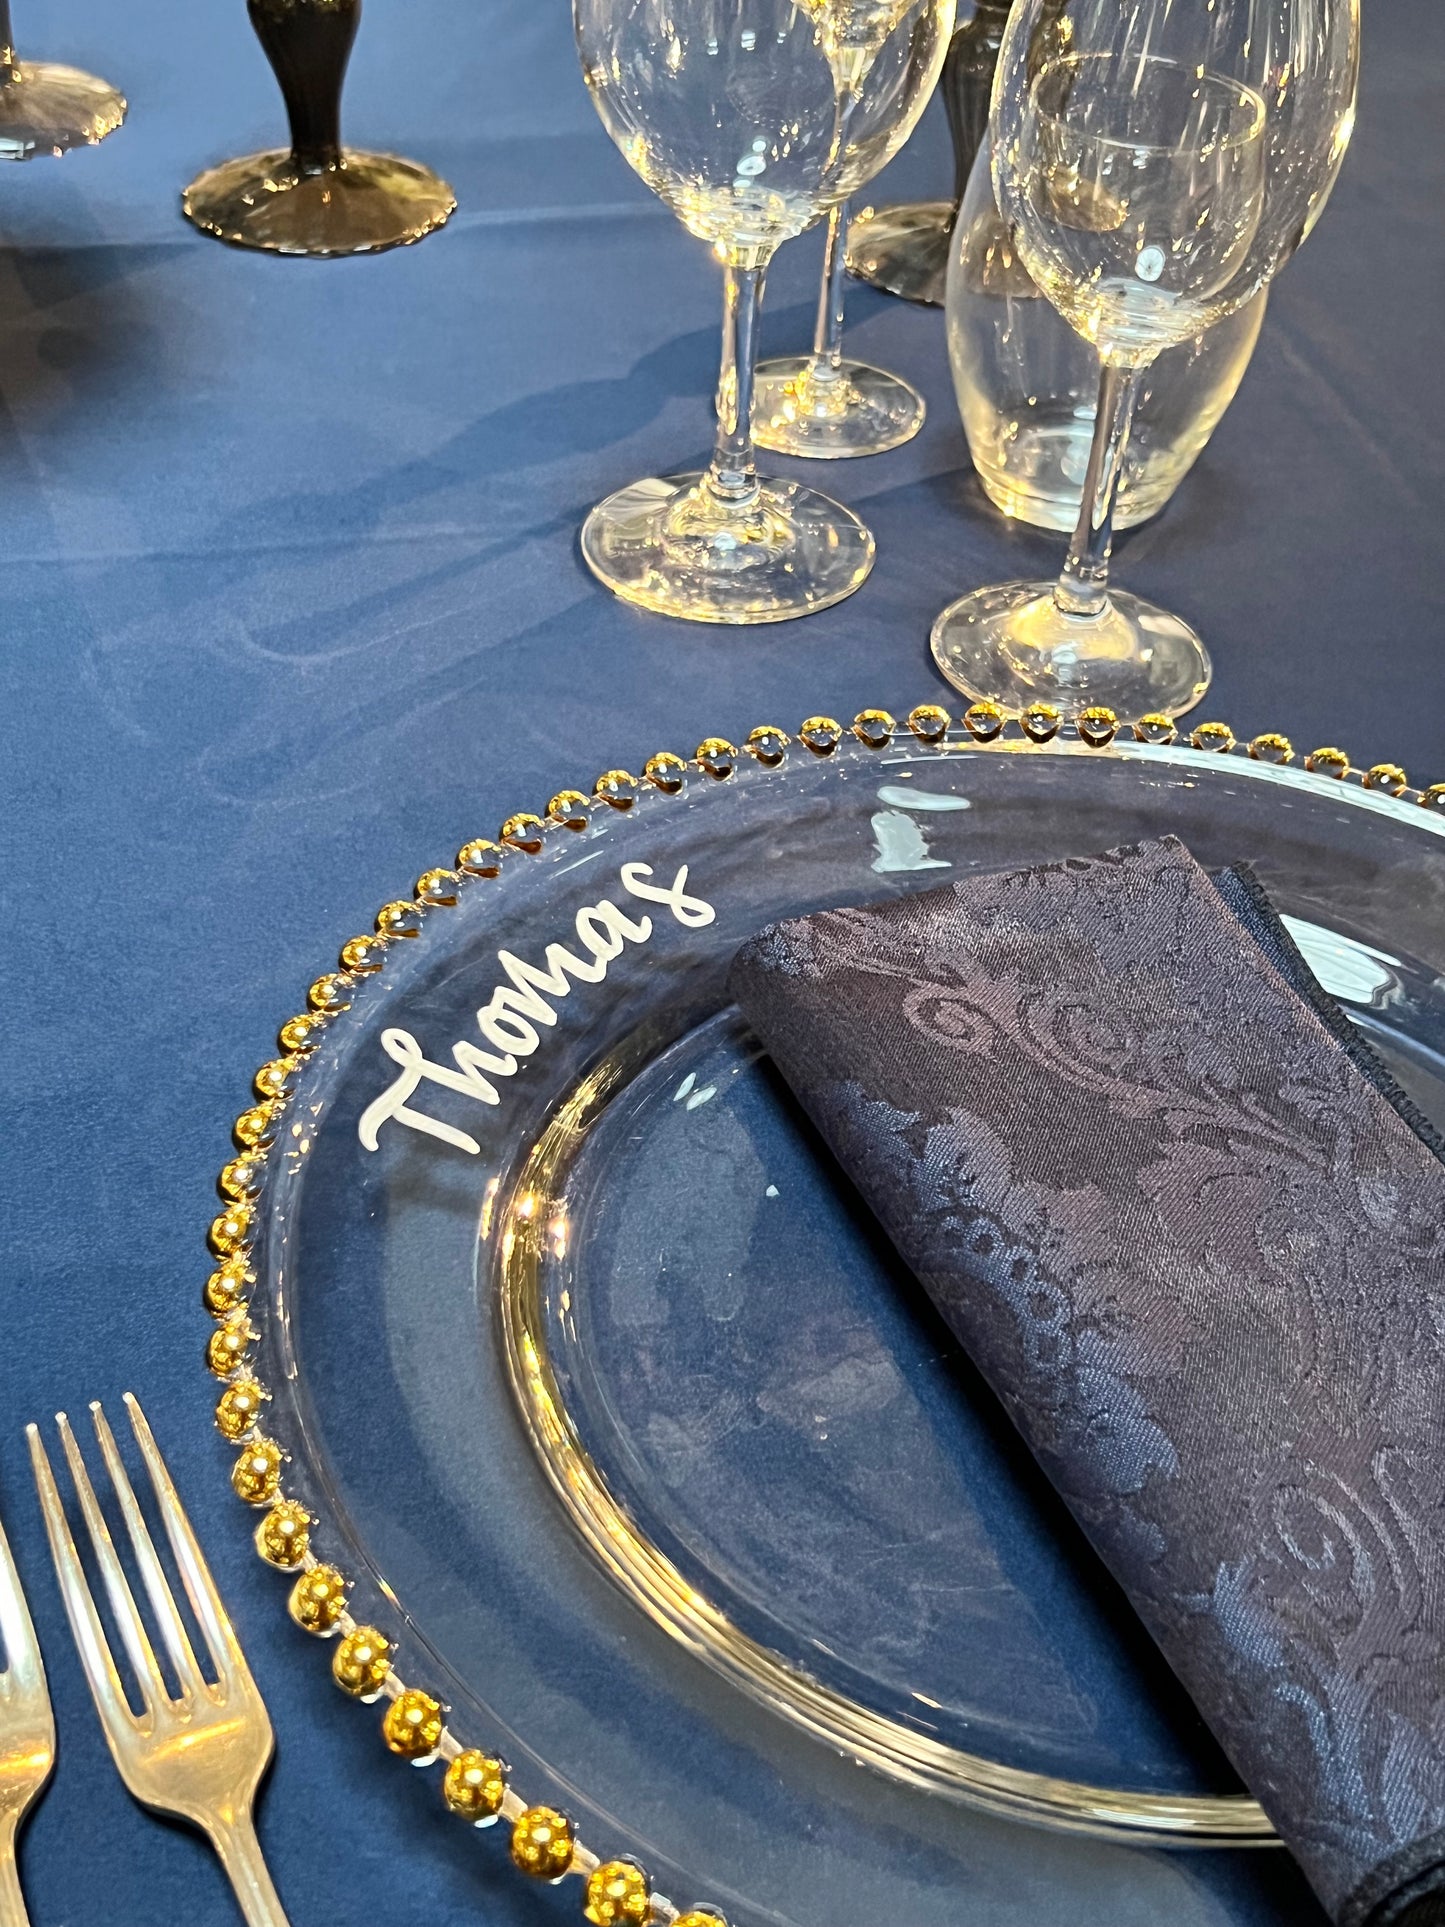 Handwritten Name on Charger Plate